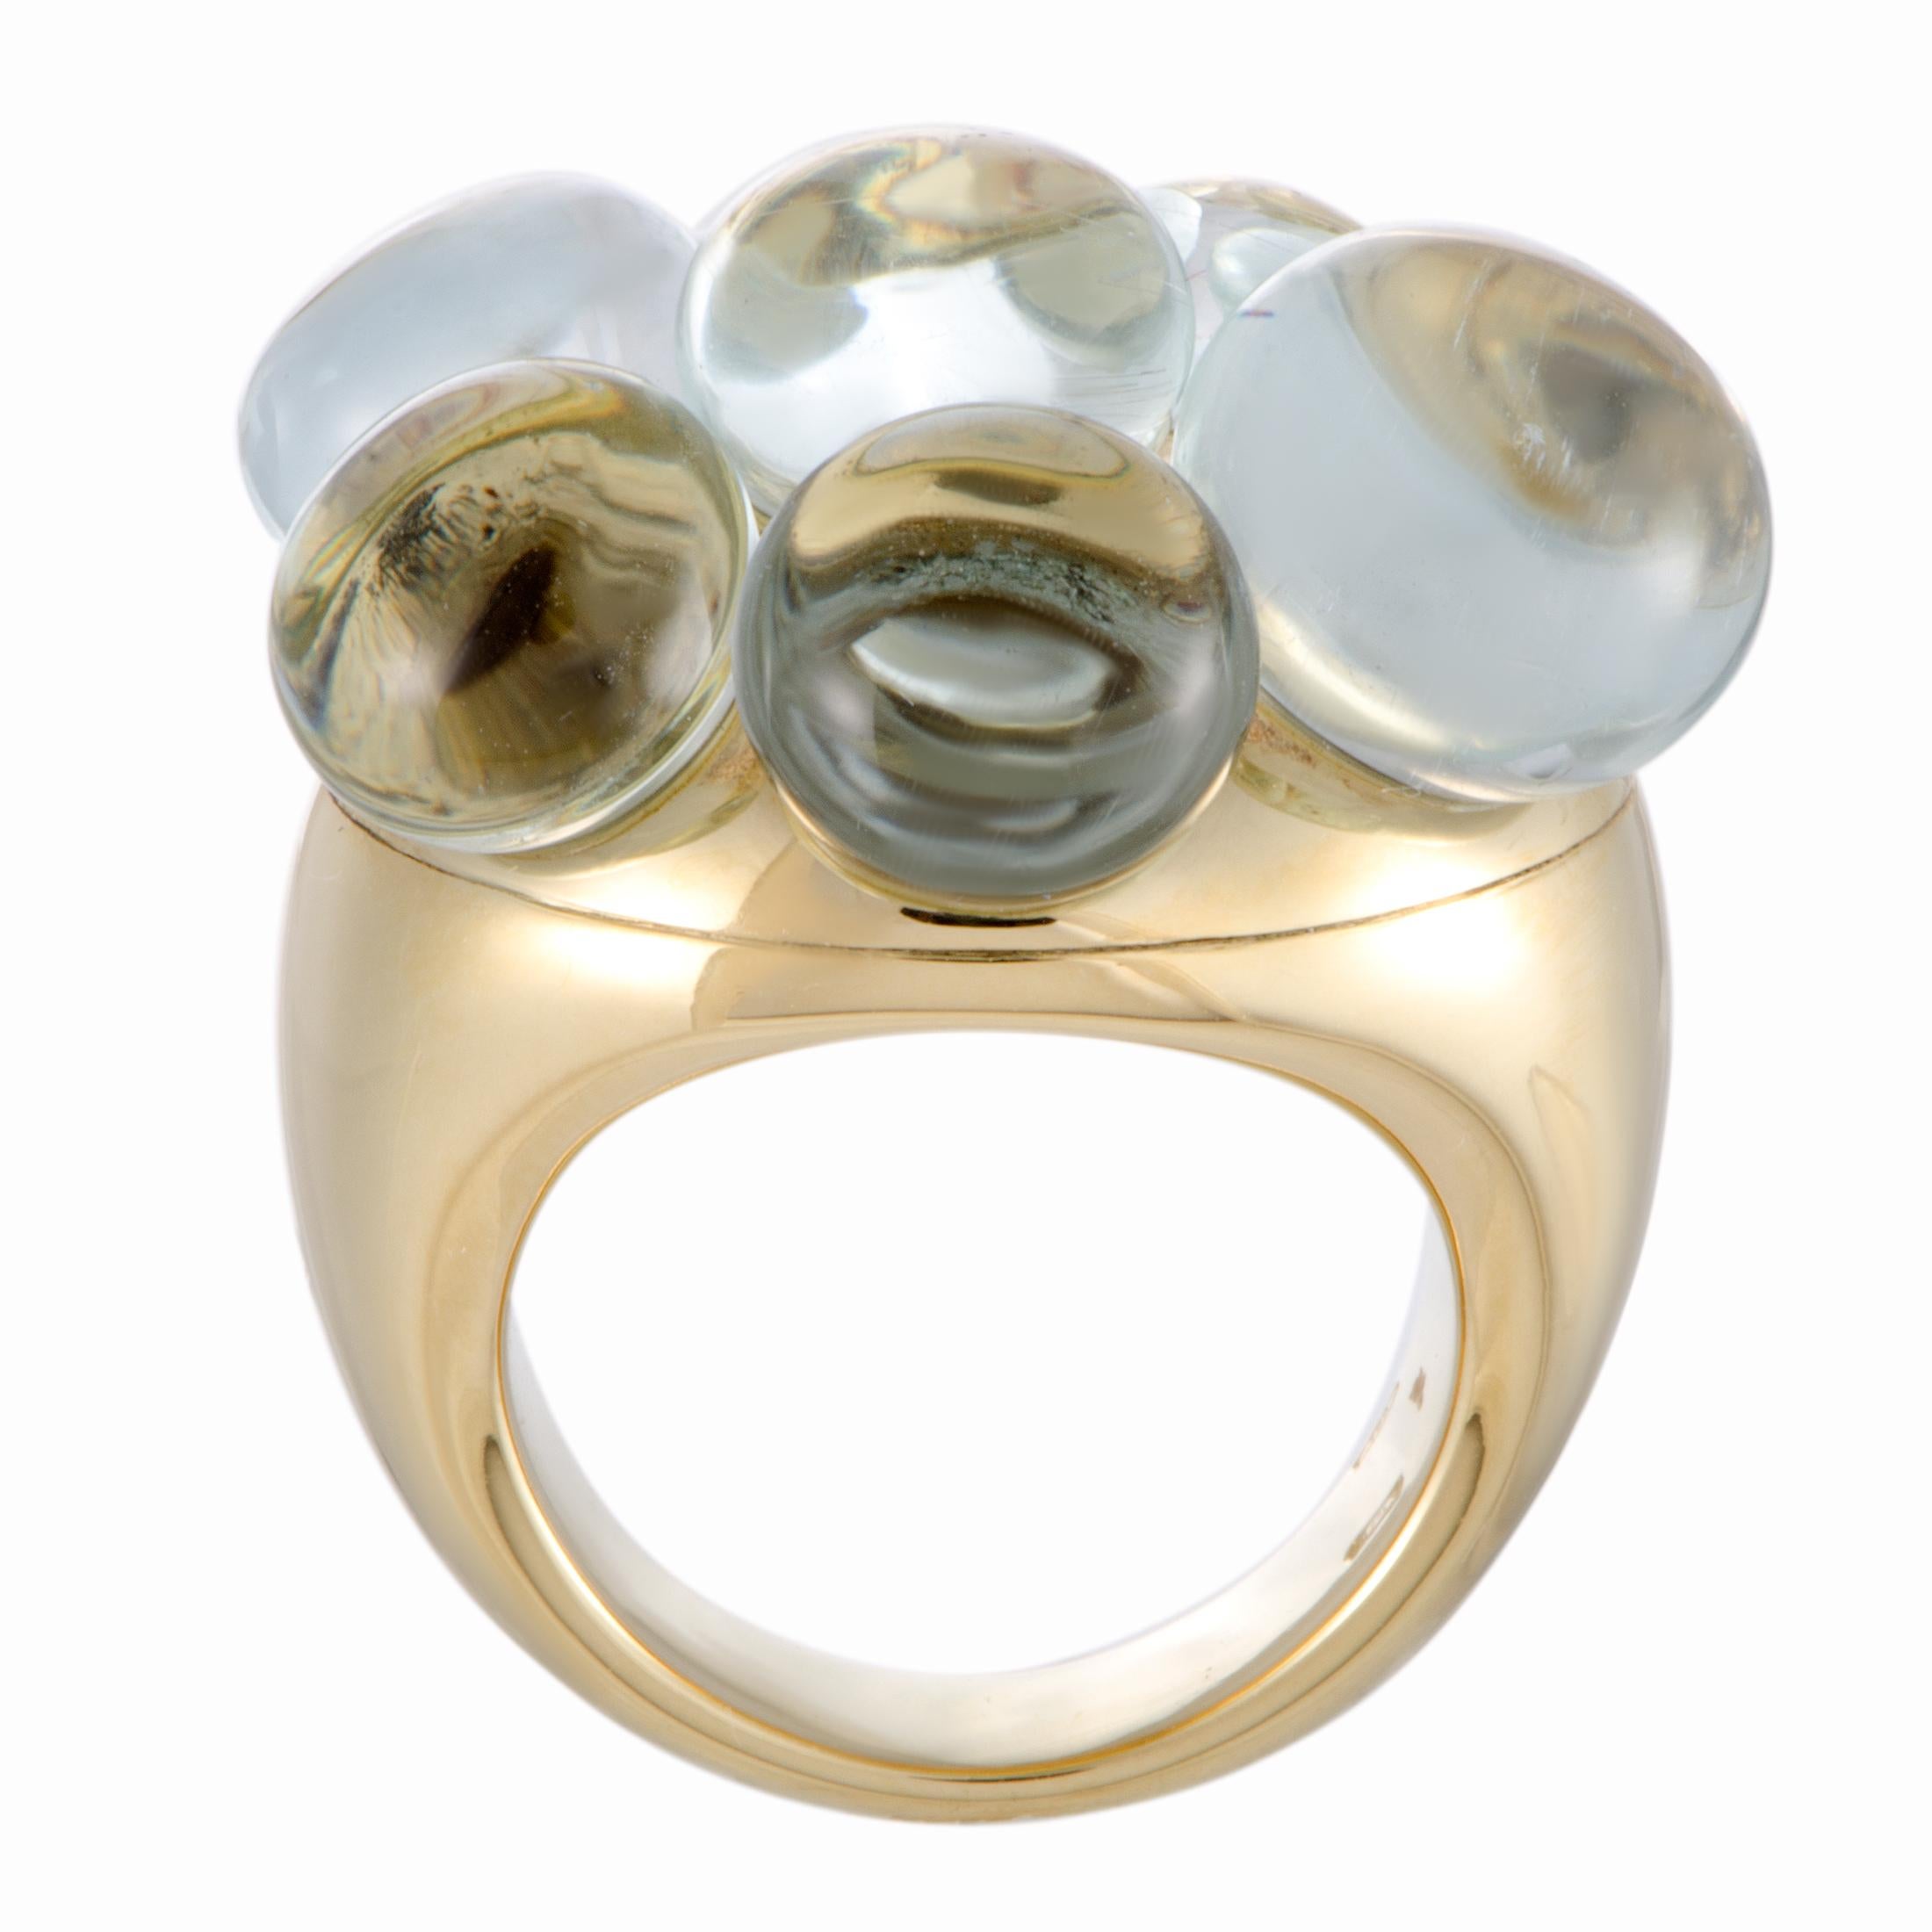 Accentuate your look in a stunningly fashionable manner with this extraordinary “Mora” ring that is beautifully designed by Pomellato and exquisitely crafted from attractive 18K yellow gold. The ring weighs 35.2 grams and it is wonderfully decorated